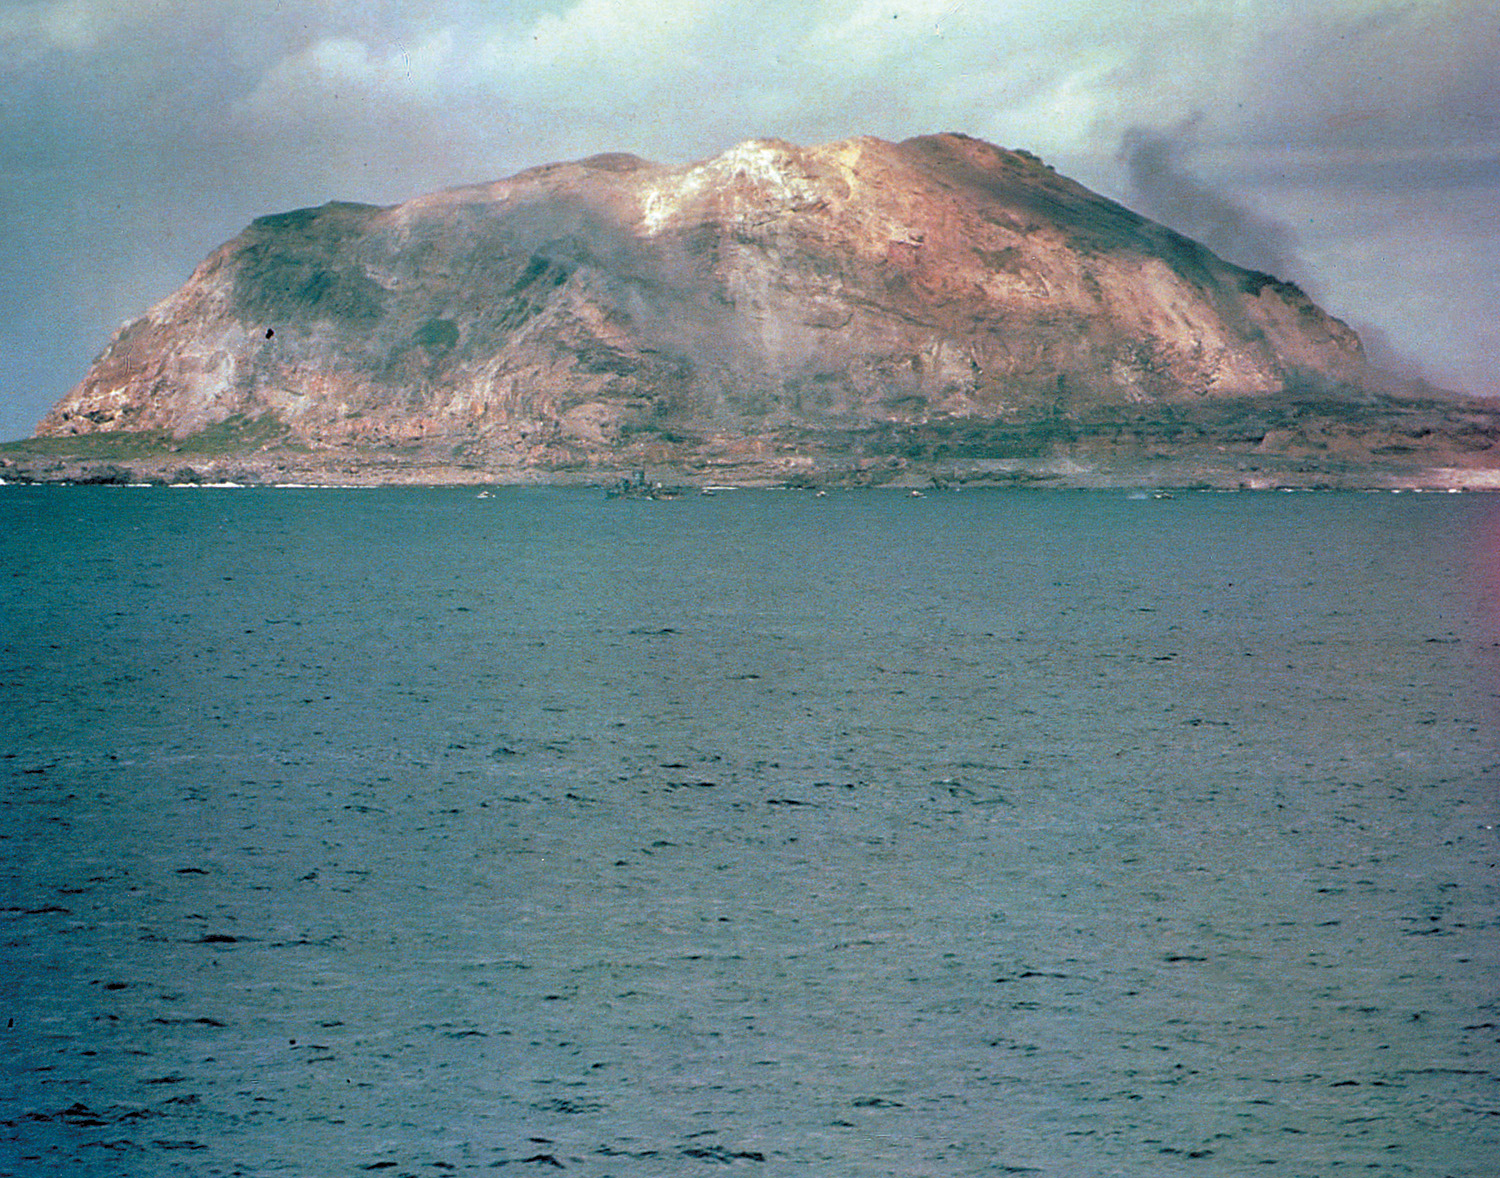 The 554-foot-tall Mount Suribachi looms in the background as the wakes of landing craft carrying invading U.S. troops stretch like fingers in the waters off the coast of Iwo Jima.